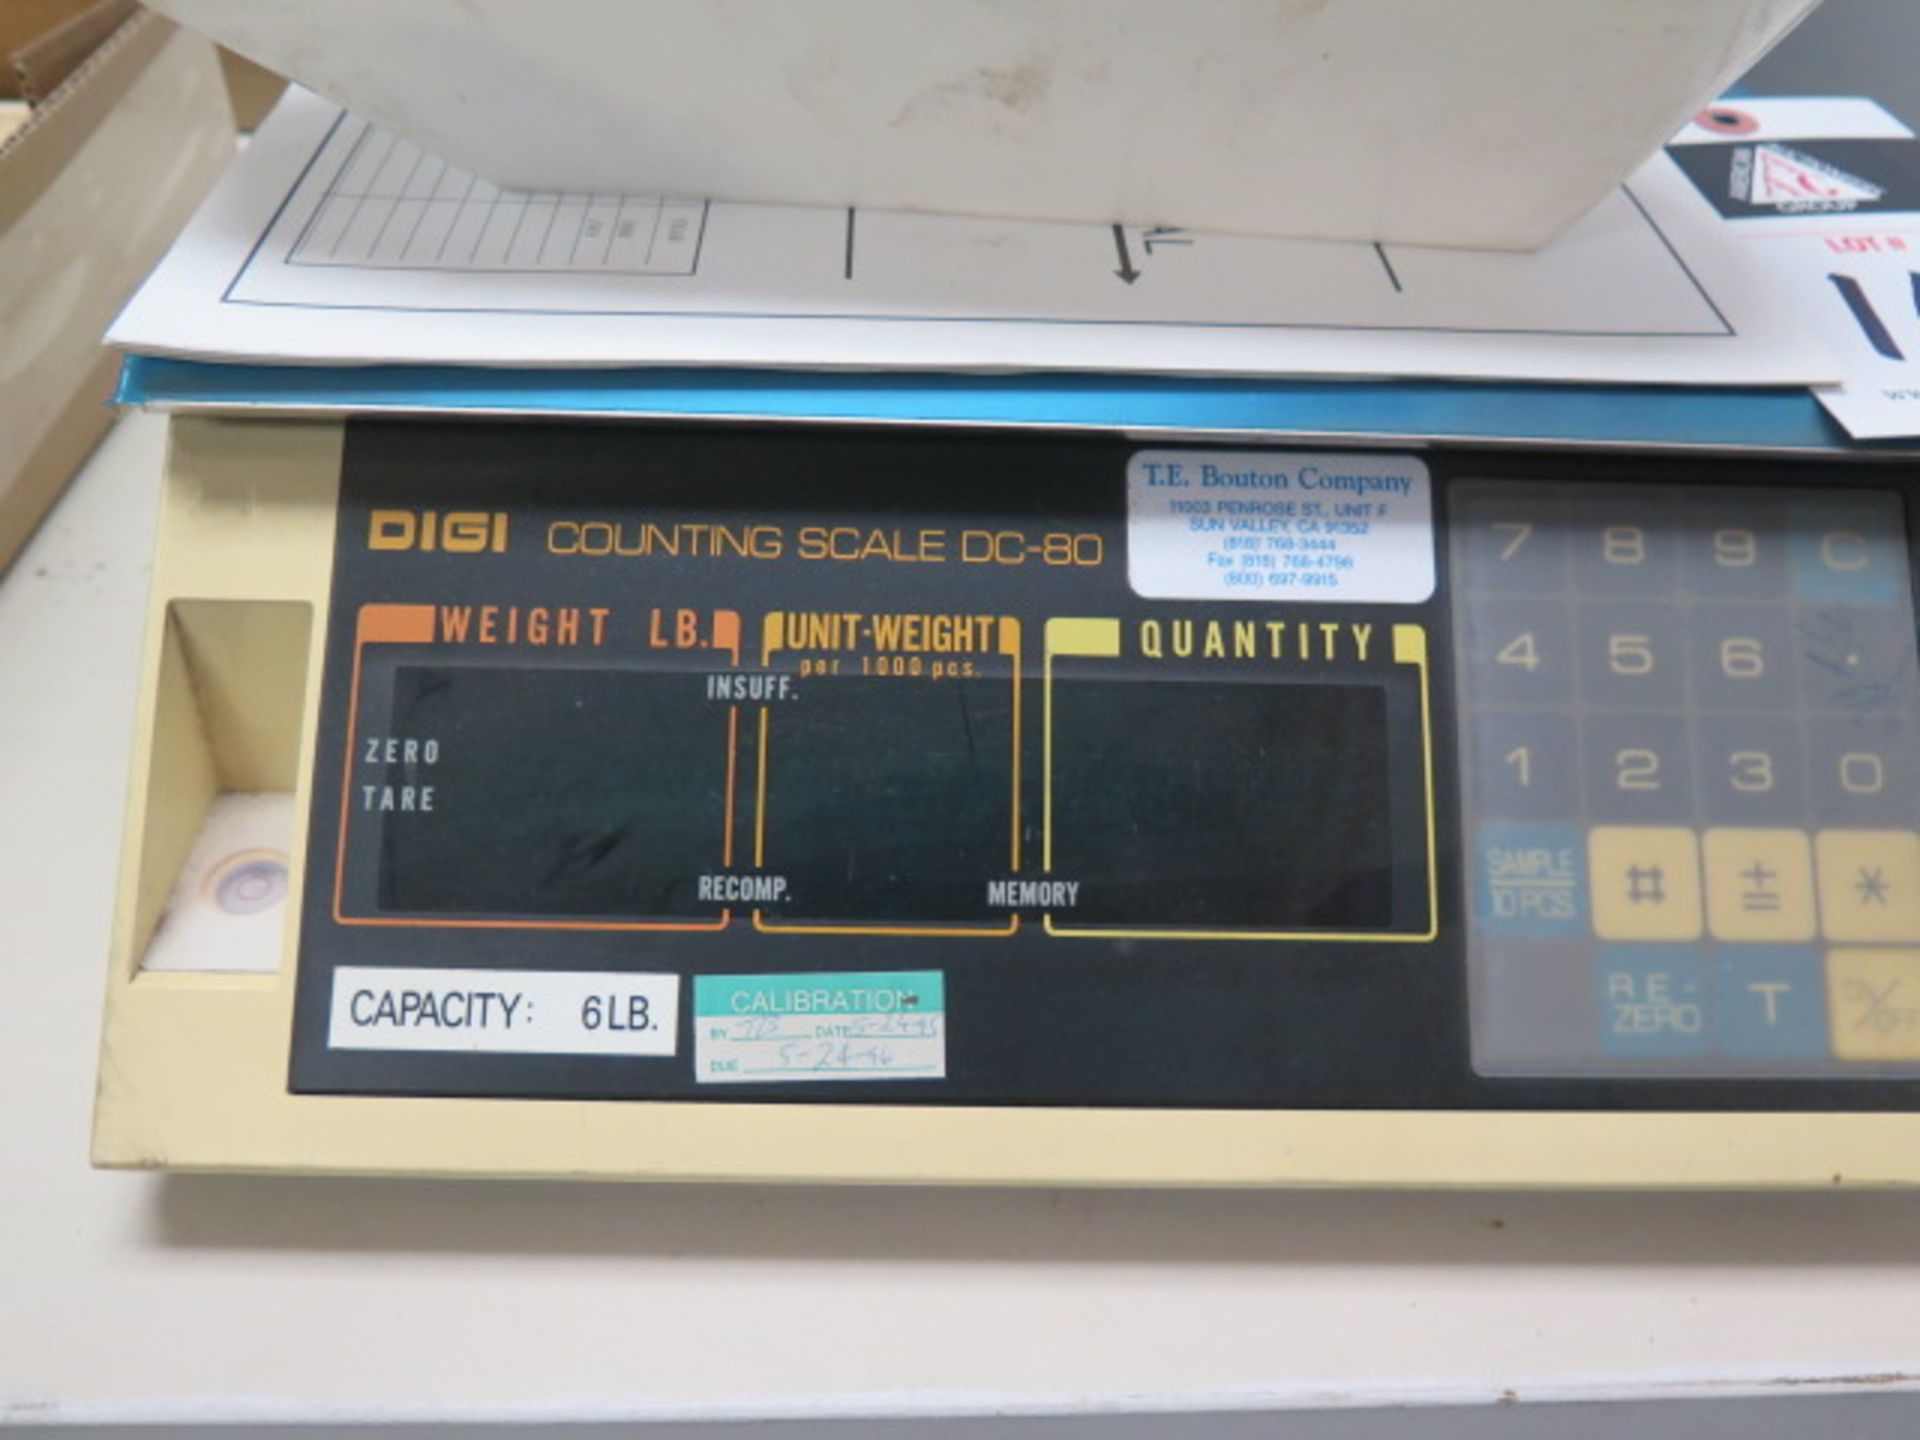 Digi DC-80 Digital Counting Scale (SOLD AS-IS - NO WARRANTY) - Image 2 of 3